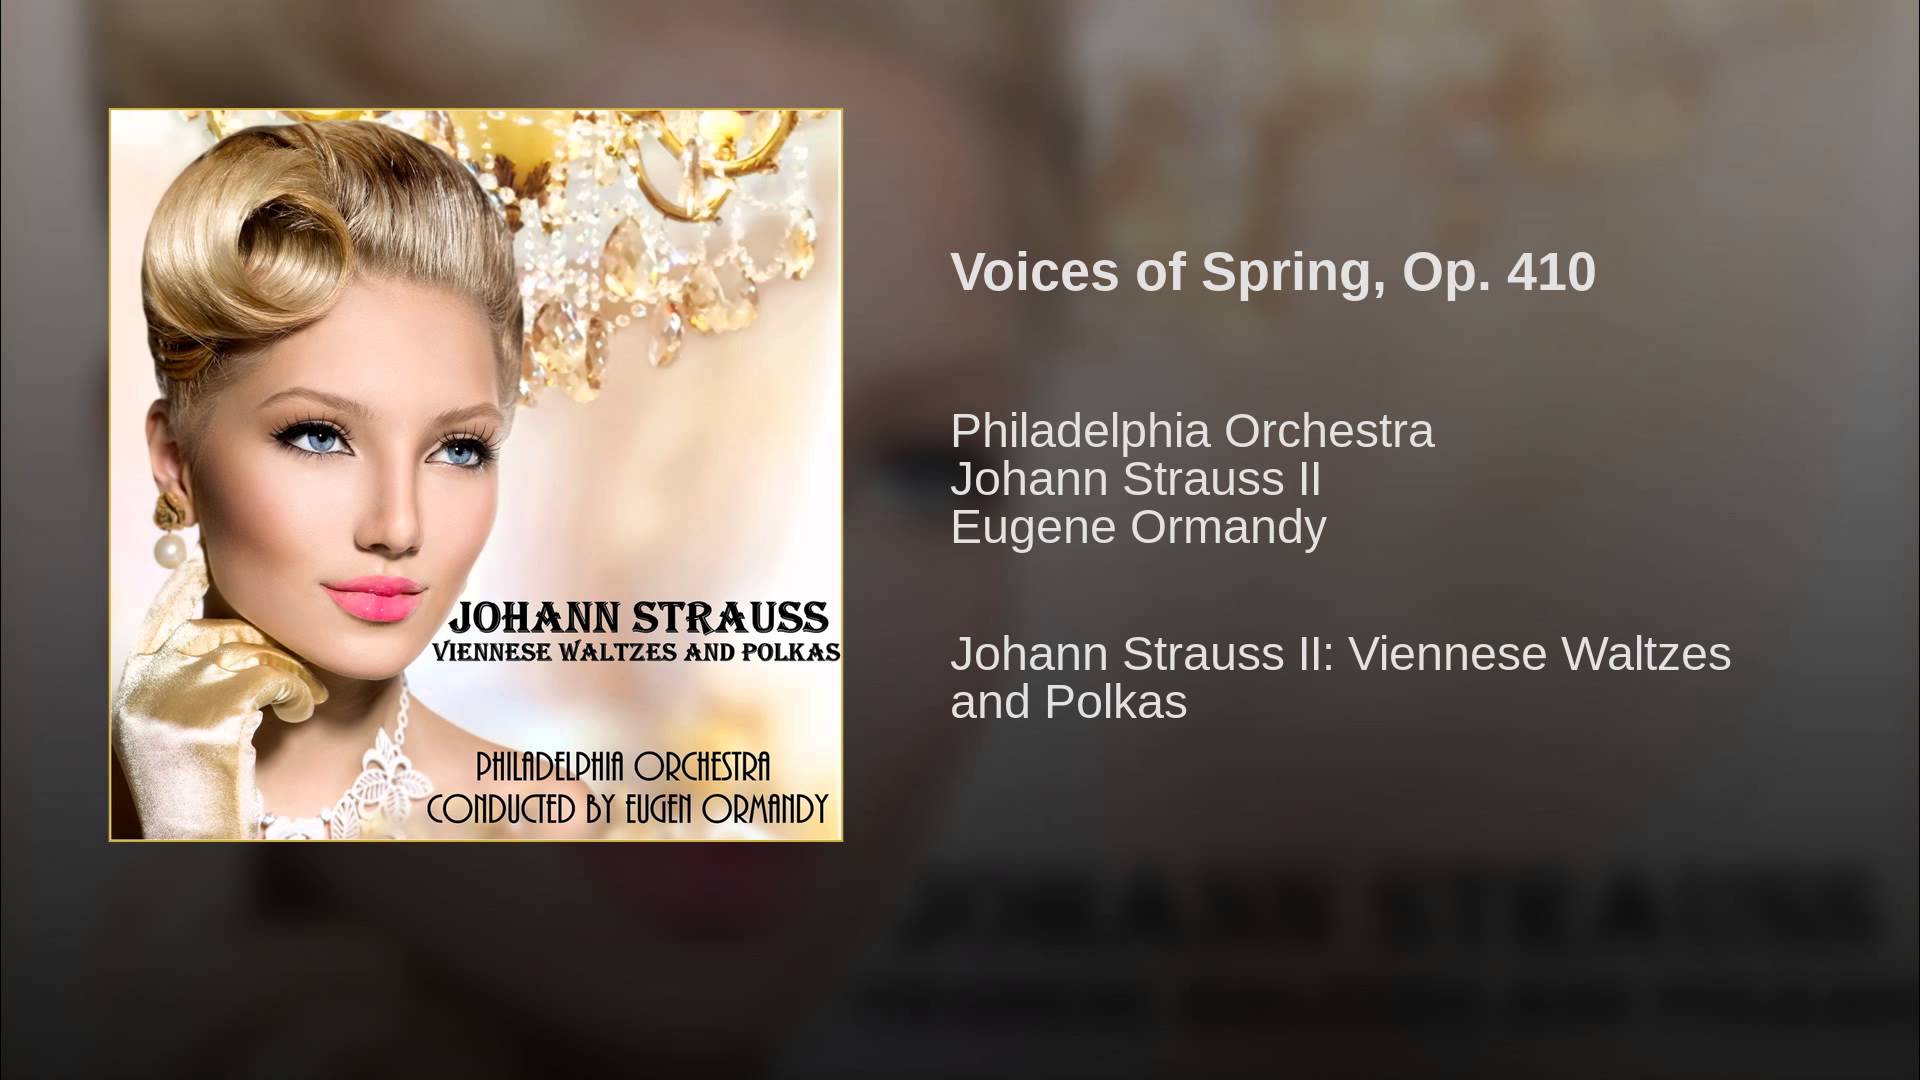 Voices of Spring, Op. 410 (Waltz) - YouTube